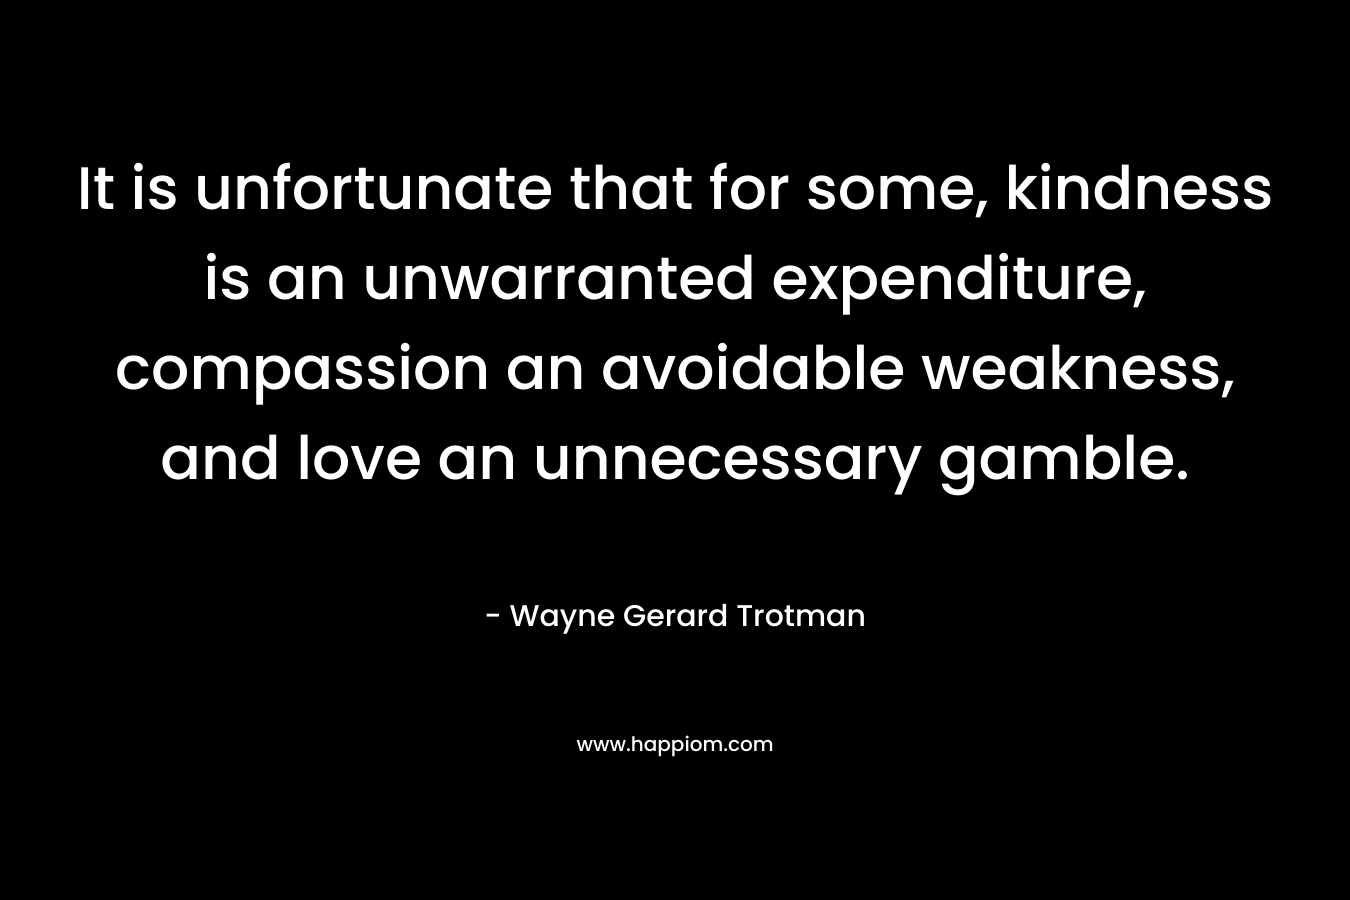 It is unfortunate that for some, kindness is an unwarranted expenditure, compassion an avoidable weakness, and love an unnecessary gamble. – Wayne Gerard Trotman